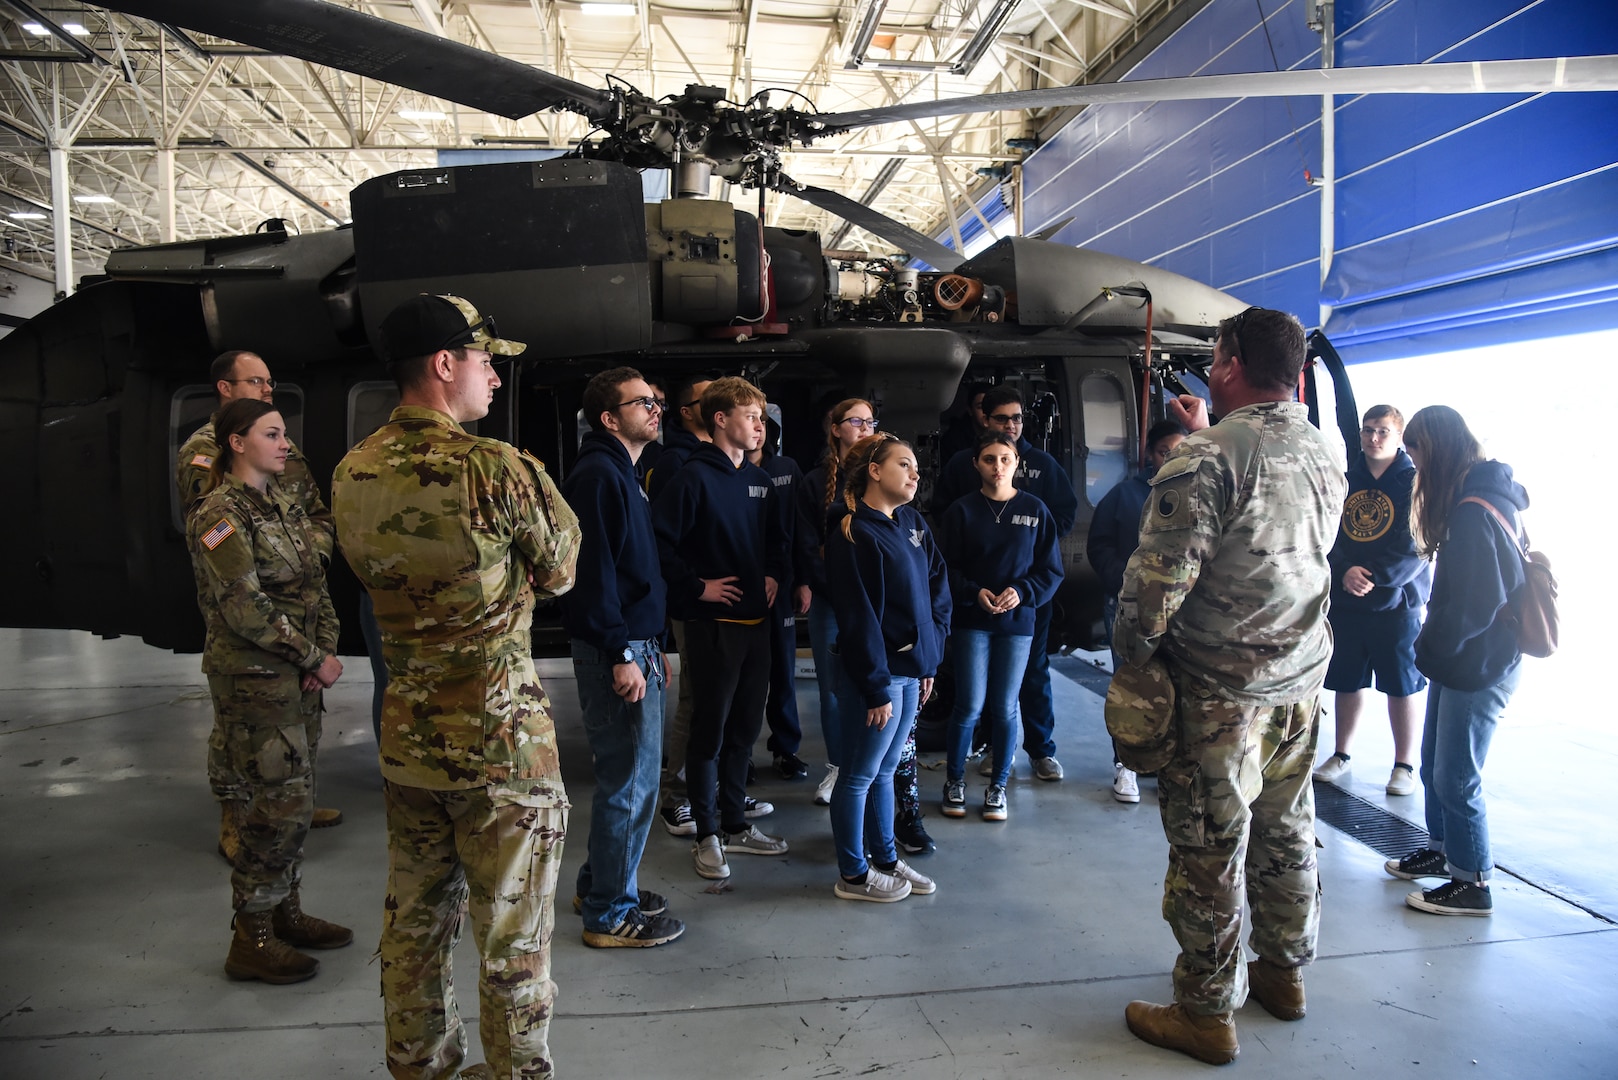 Junior ROTC cadets from Gloucester High School visit the Virginia National Guard’s Army Aviation Support Facility for a tour and information session Nov. 8, 2022, in Sandston, Virginia. The event, organized by recruiters from the Virginia Army National Guard’s Recruiting and Retention Battalion, included 18 naval JROTC cadets, all juniors and seniors, who received an overview of the U.S. Army and the capabilities of the Virginia National Guard’s Army aviation assets before touring the maintenance facility and a UH-60 Black Hawk helicopter. (U.S. Army National Guard photo by Sgt. 1st Class Terra C. Gatti)